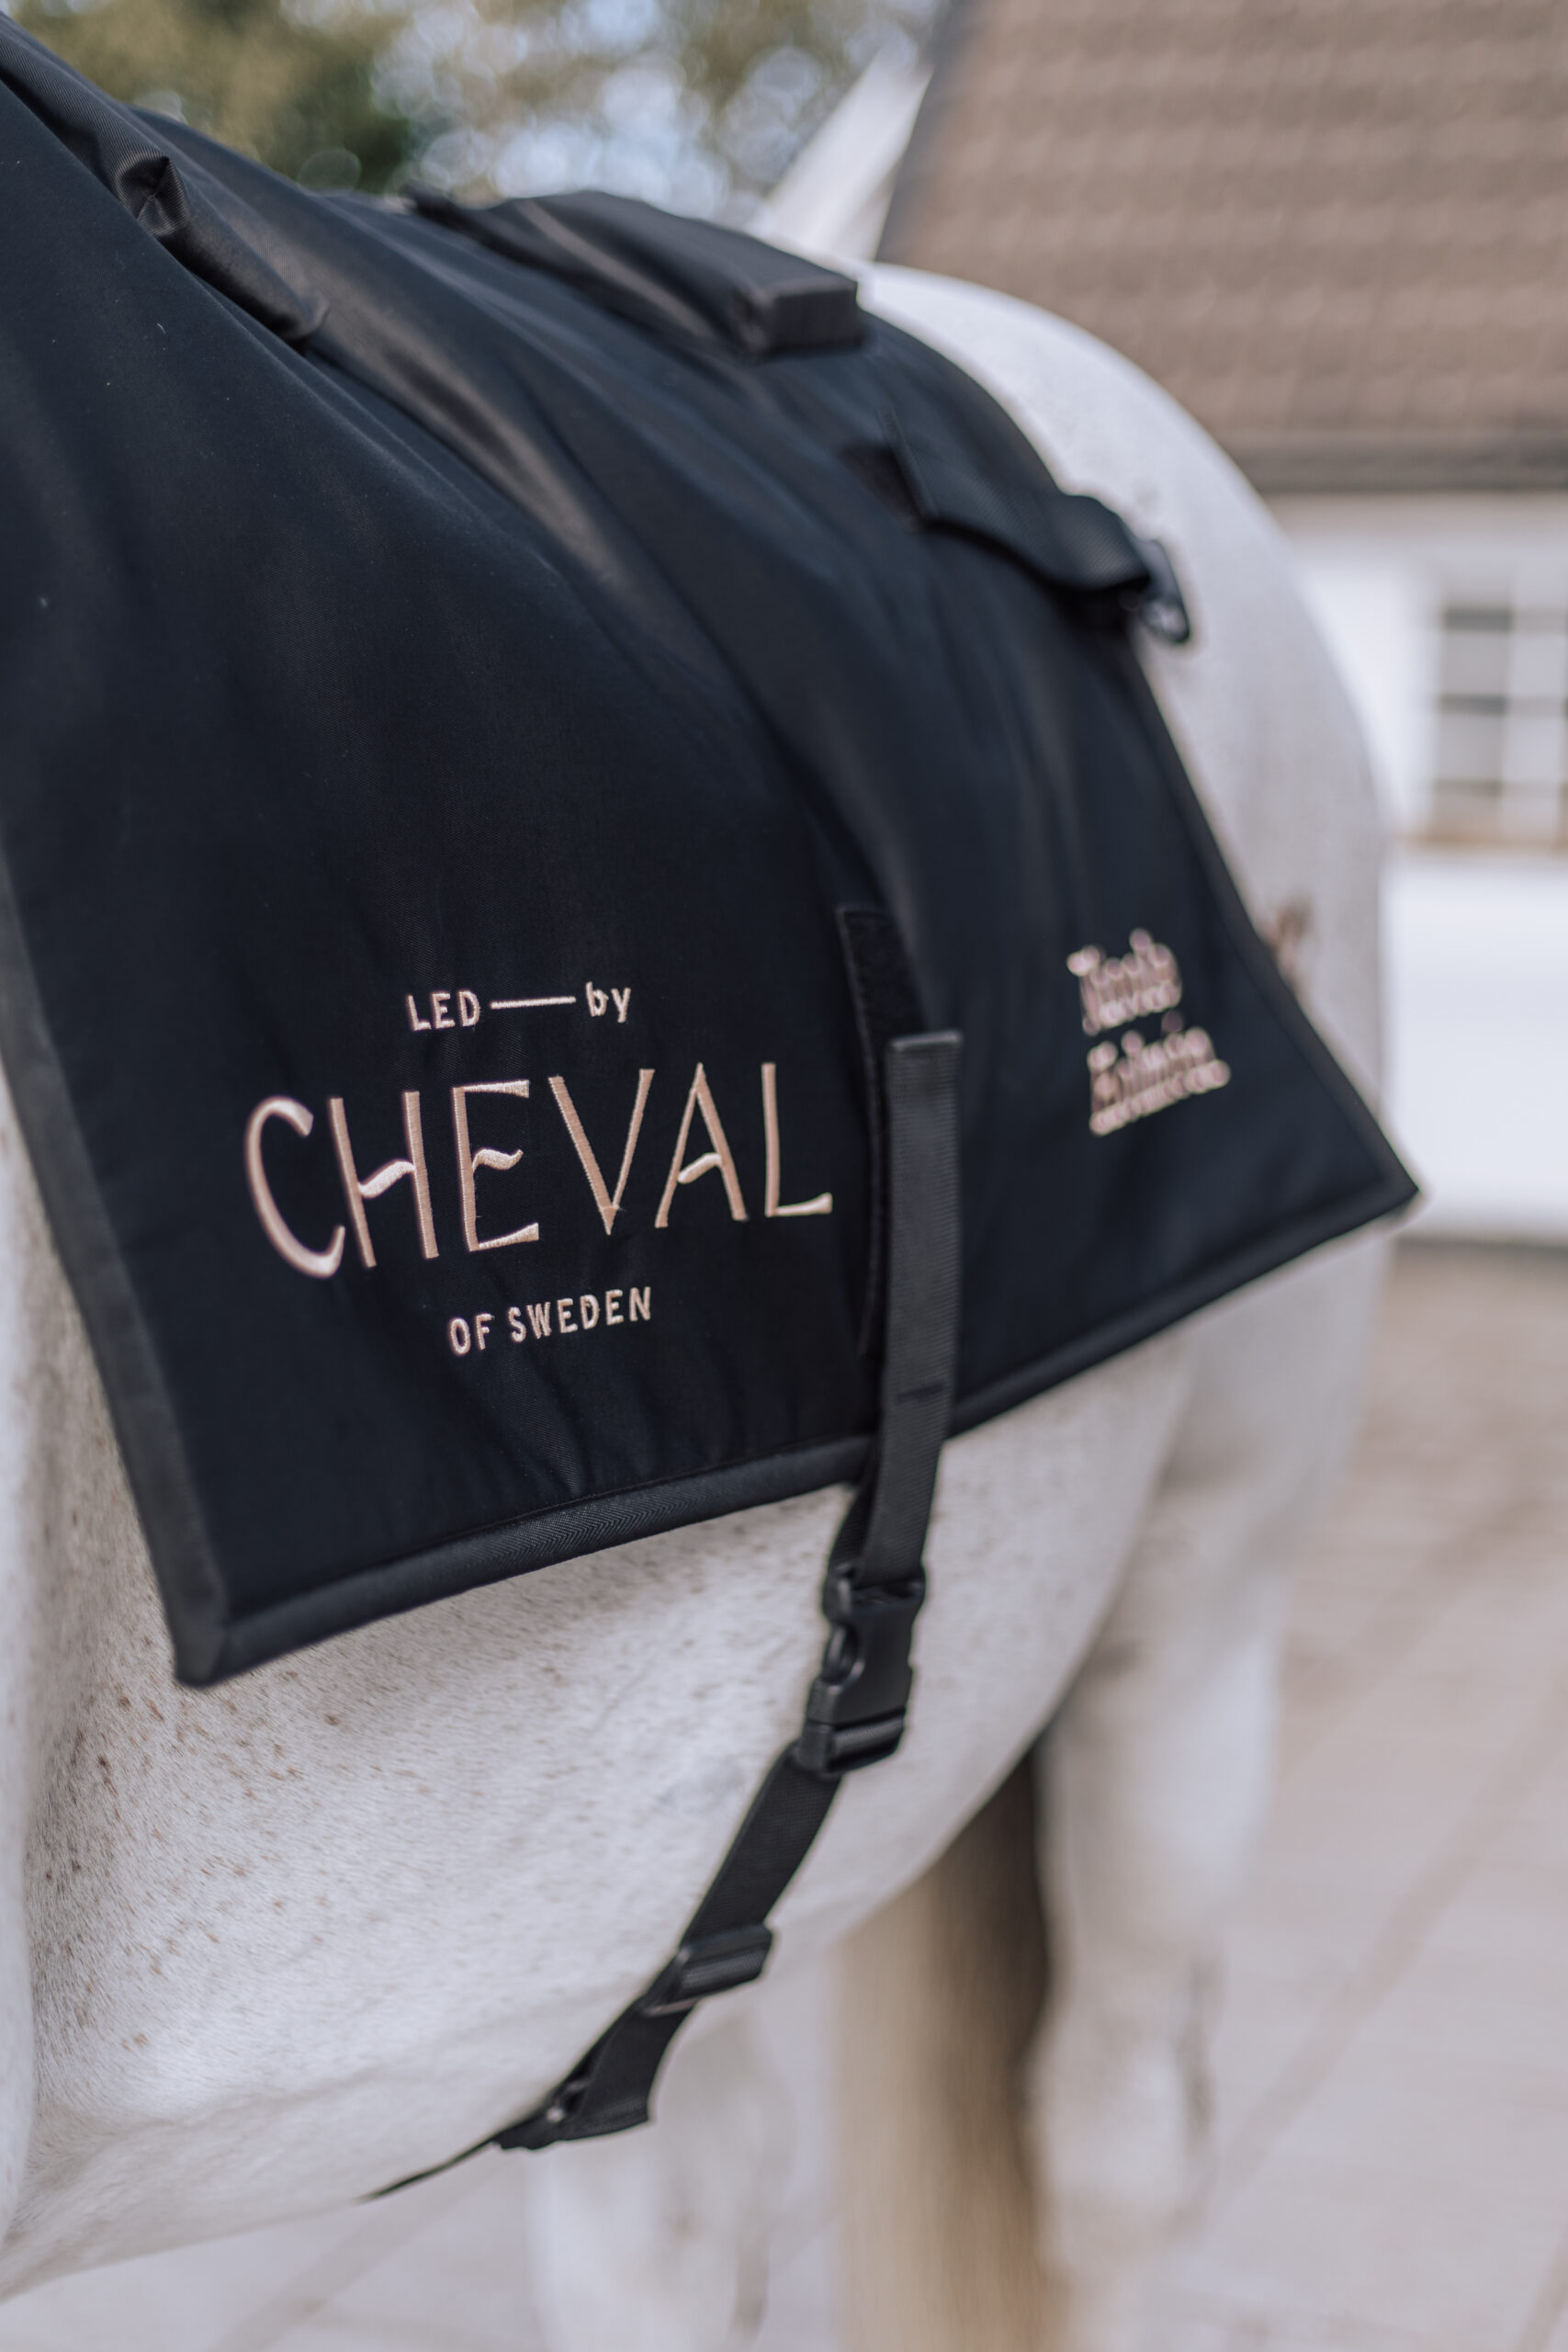 Contact Us CHEVAL LED by -